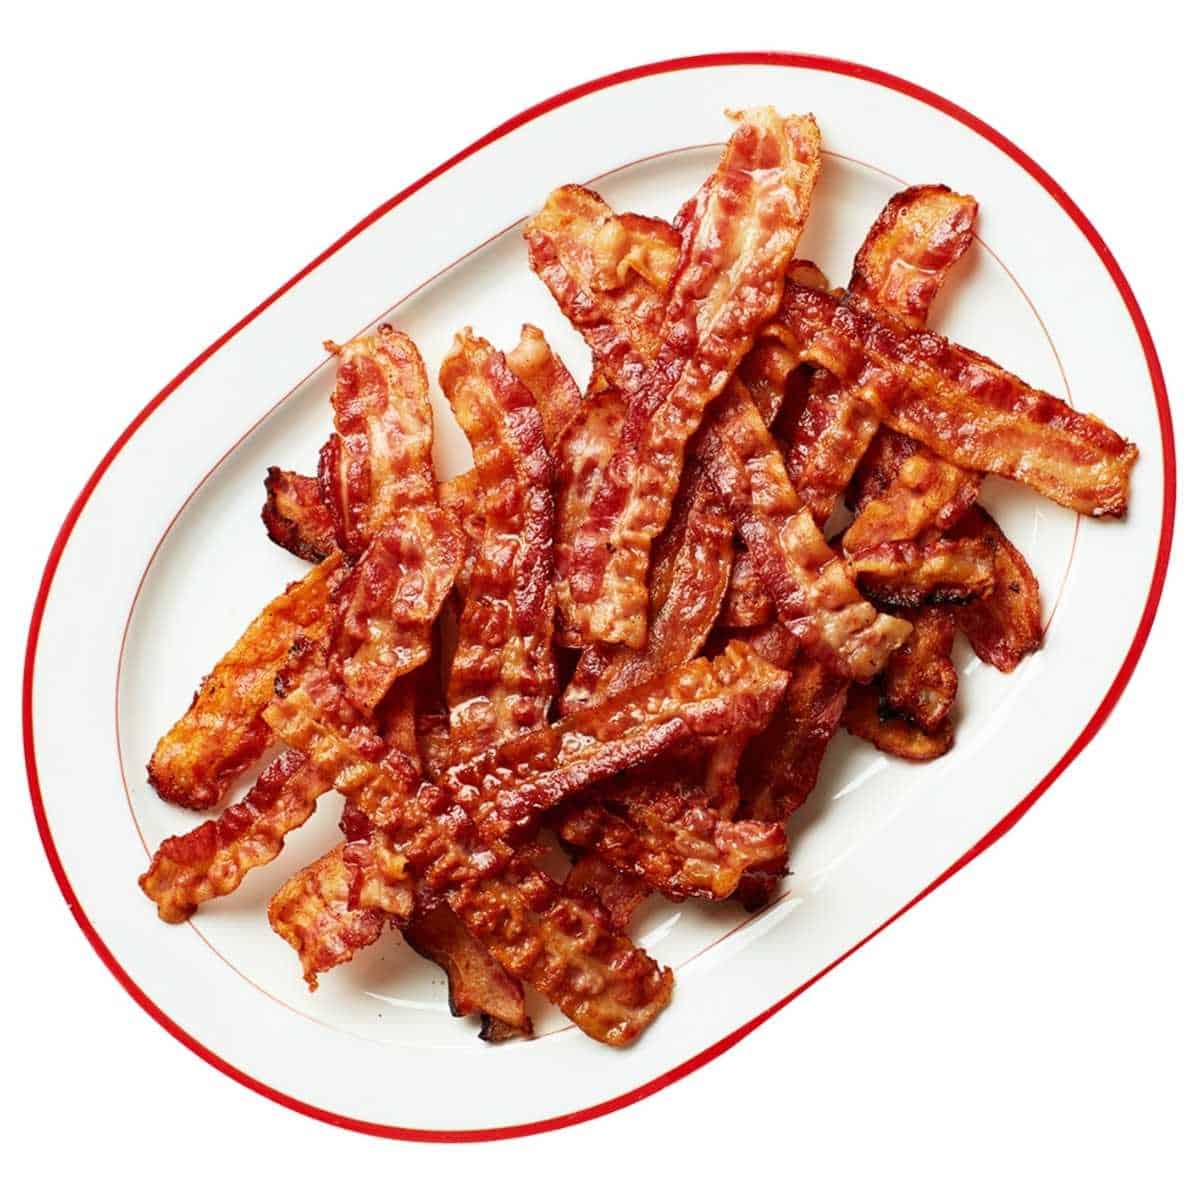 Two dozen strips of golden brown cooked reheated bacon on a white and red platter.